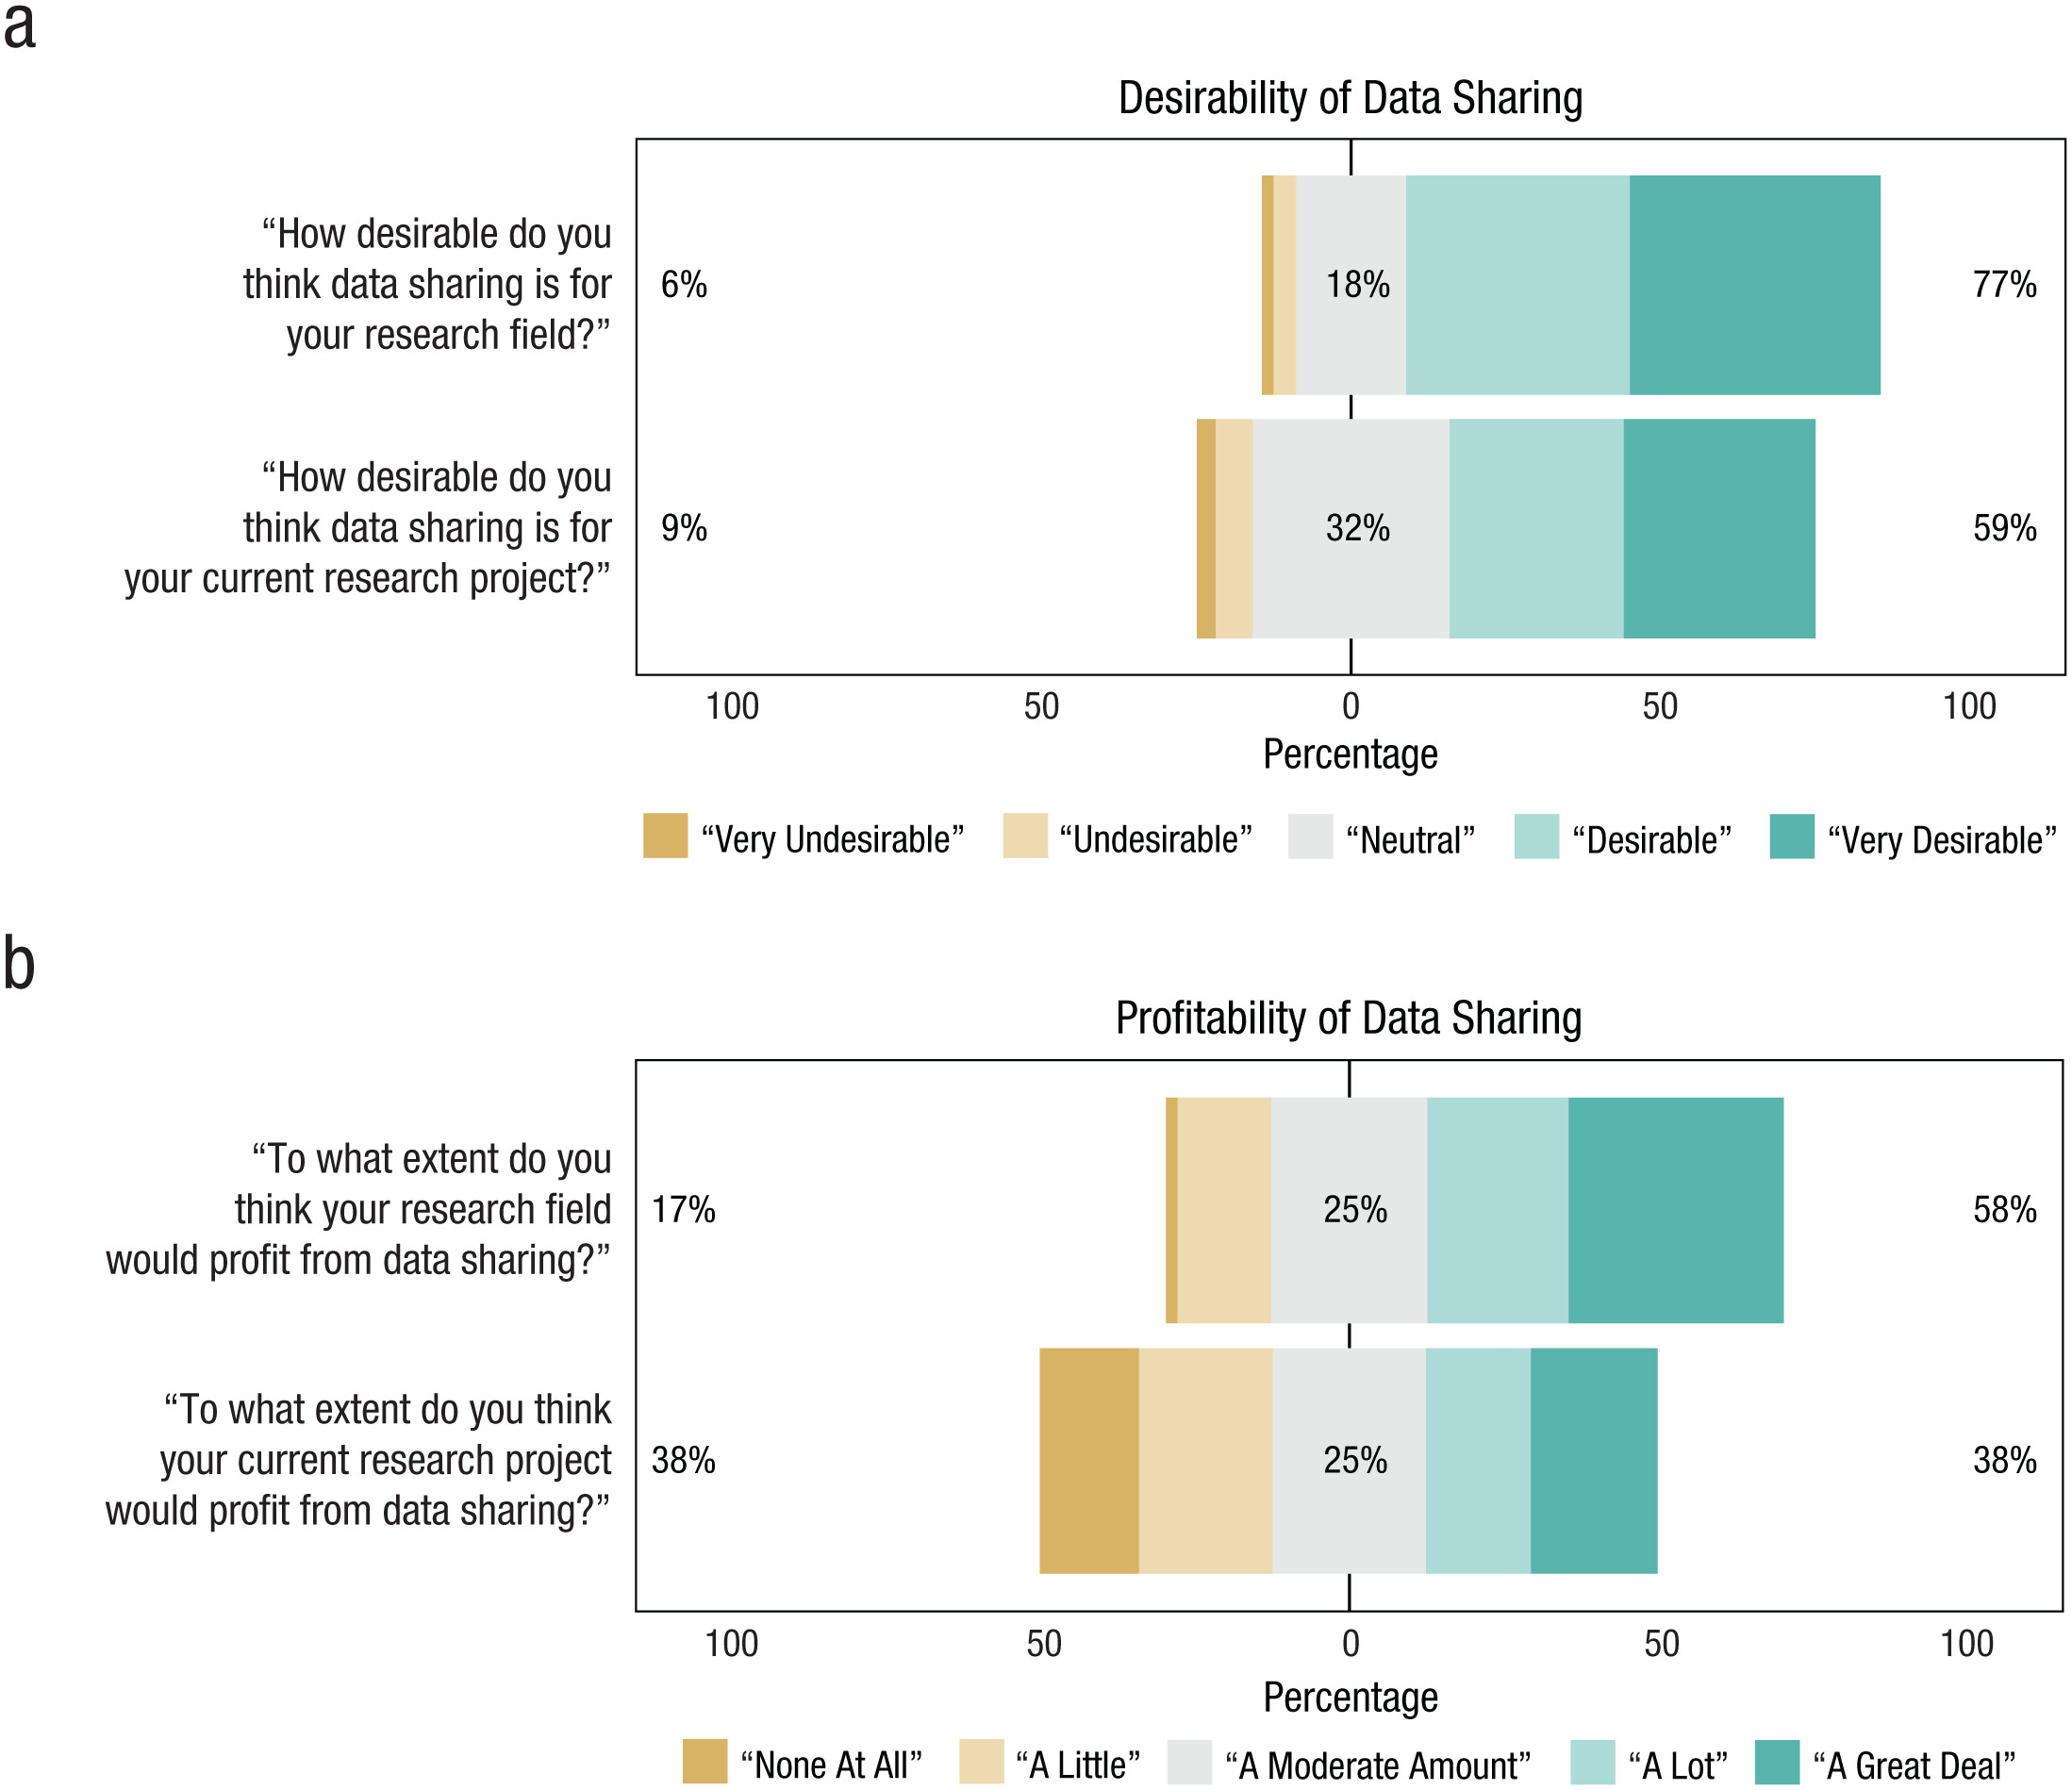 Figure 1 from [@Houtkoop2018-tl](https://doi.org/10.1177/2515245917751886). Responses to the survey questions on the (a) desirability and (b) profitability of data sharing for the researchers’ own fields and their own current projects. For each statement in (a), the number to the left of the data bar indicates the percentage of researchers who responded with “very undesirable” or “undesirable,” the number in the center of the data bar indicates the percentage who responded with “neutral,” and the number to the right of the data bar indicates the percentage who responded with “desirable” or “very desirable.” For each statement in (b), the number to the left of the data bar indicates the percentage of researchers who responded with “none at all” or “a little,” the number in the center of the data bar indicates the percentage who responded with “a moderate amount,” and the number to the right of the data bar indicates the percentage who responded with “a lot” or “a great deal.” This figure was created using the likert package in R (Bryer & Speerschneider, 2015).